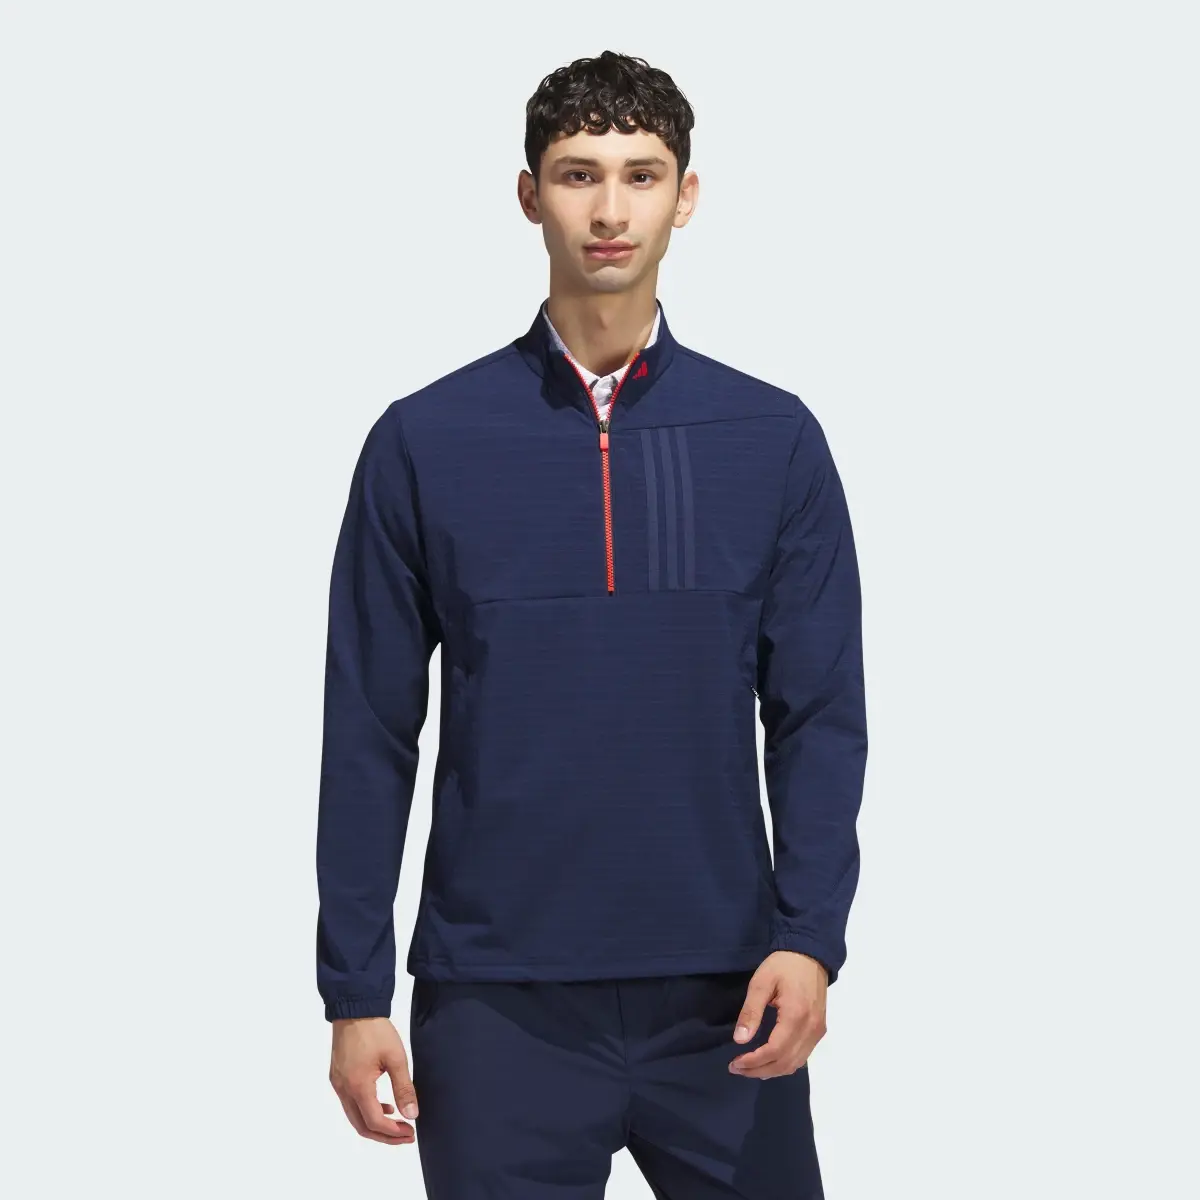 Adidas Ultimate365 Tour WIND.RDY Half-Zip Pullover. 2